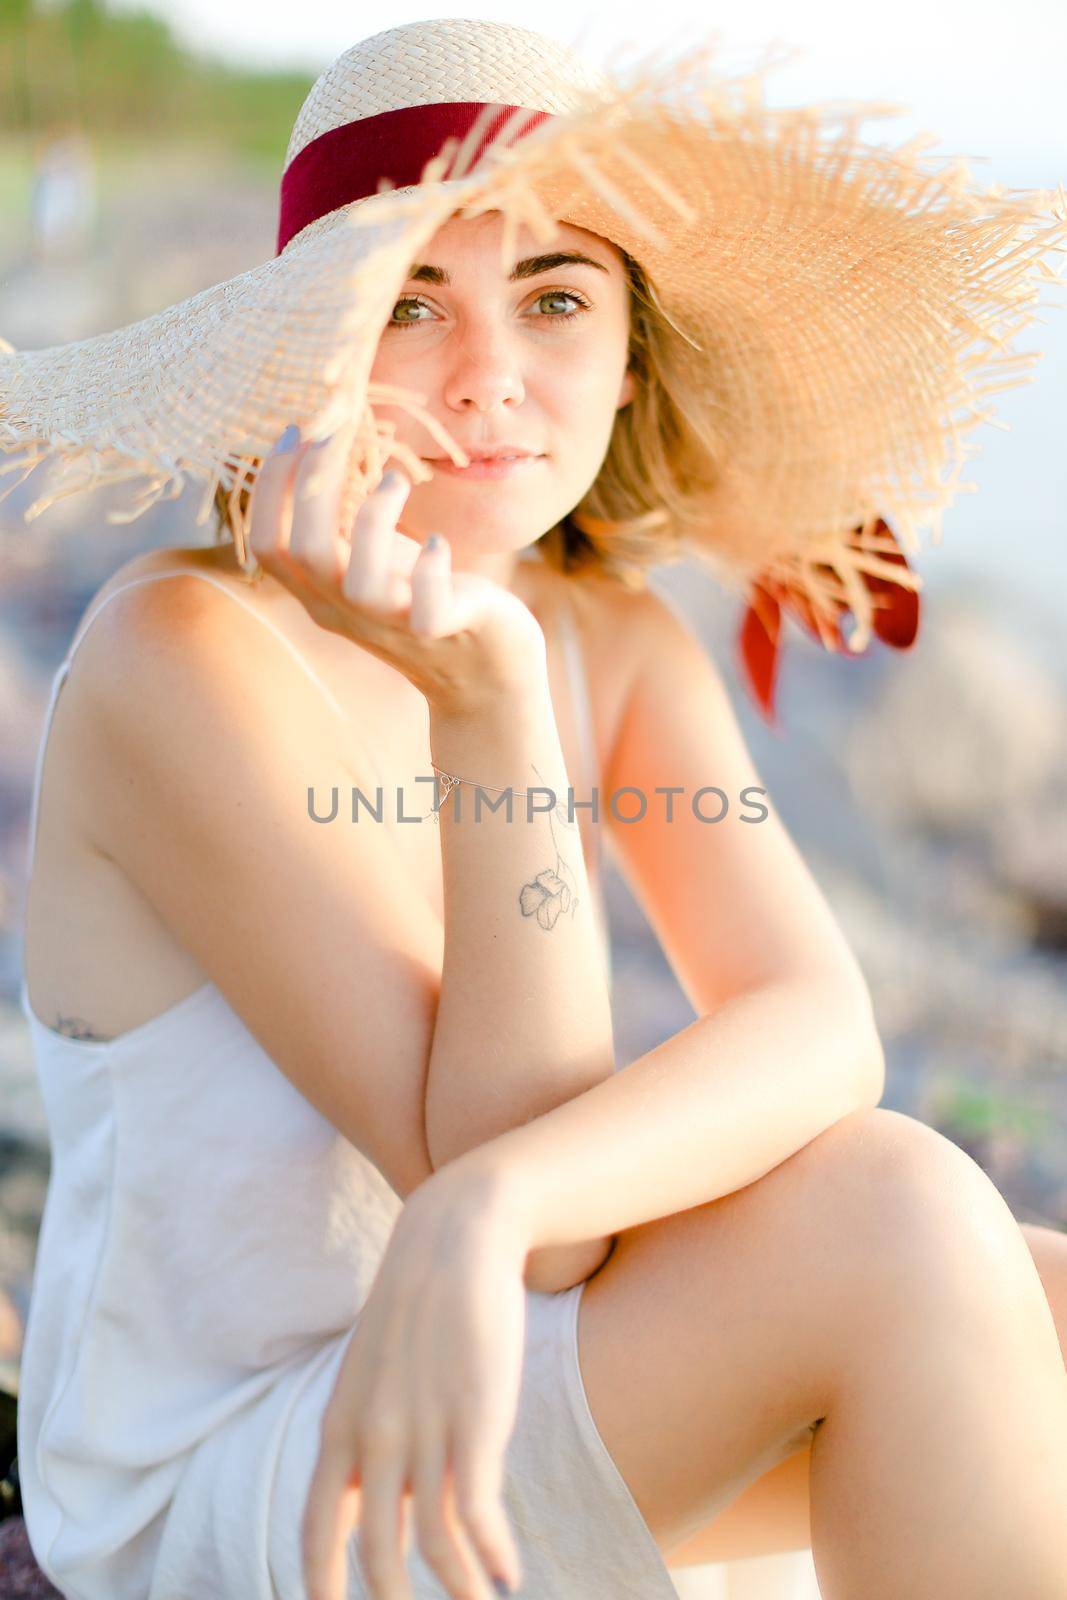 Back view of woman in hat with red ribbon walking on shingle beach. Concept of summer vacations and resort.